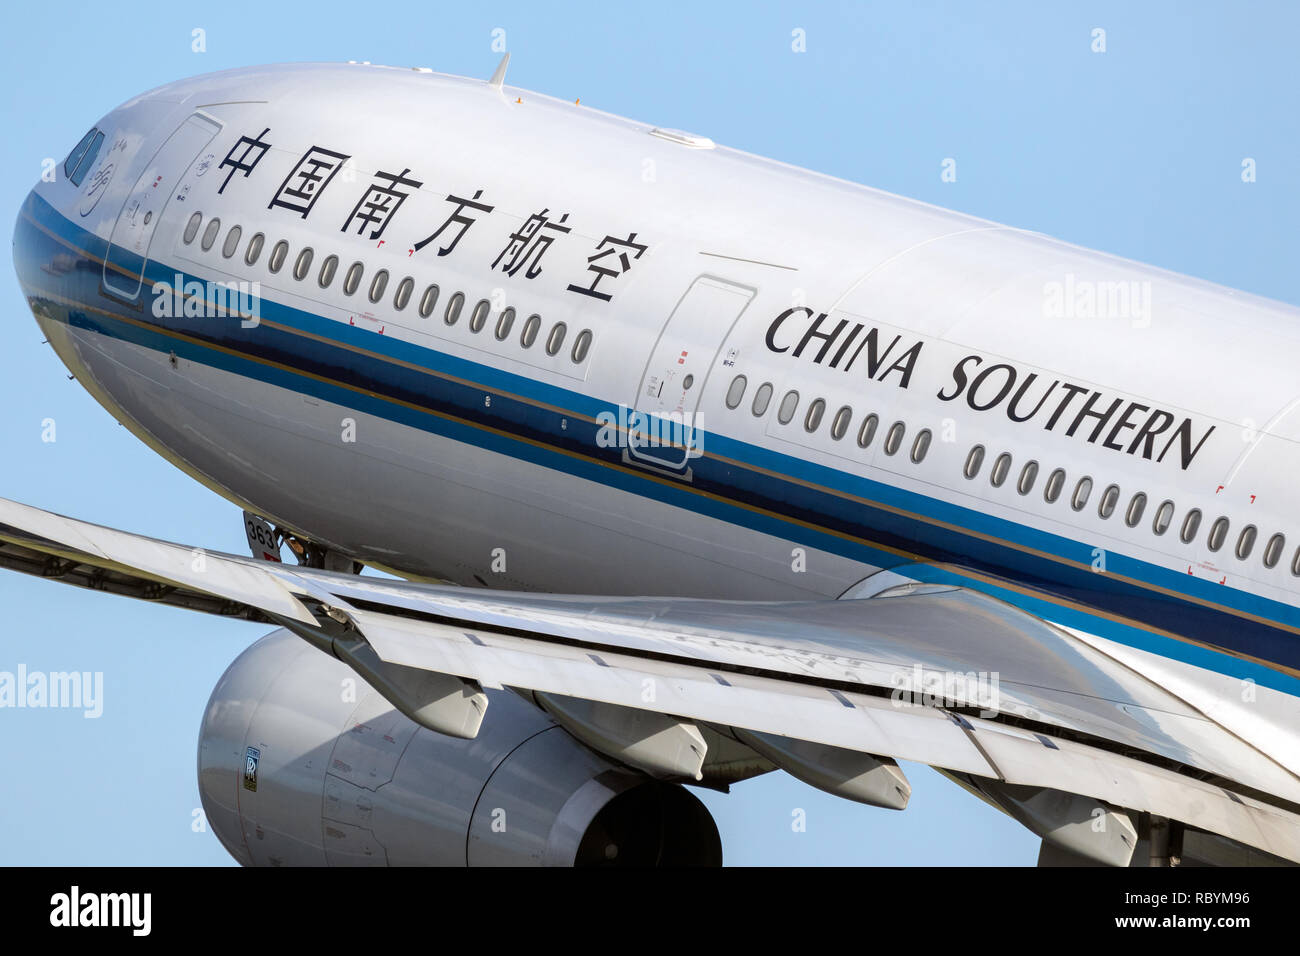 AMSTERDAM, THE NETHERLANDS - JAN 9, 2019: China Southern Airlines Airbus A330 passenger plane taking off from Amsterdam-Schiphol International Airport Stock Photo